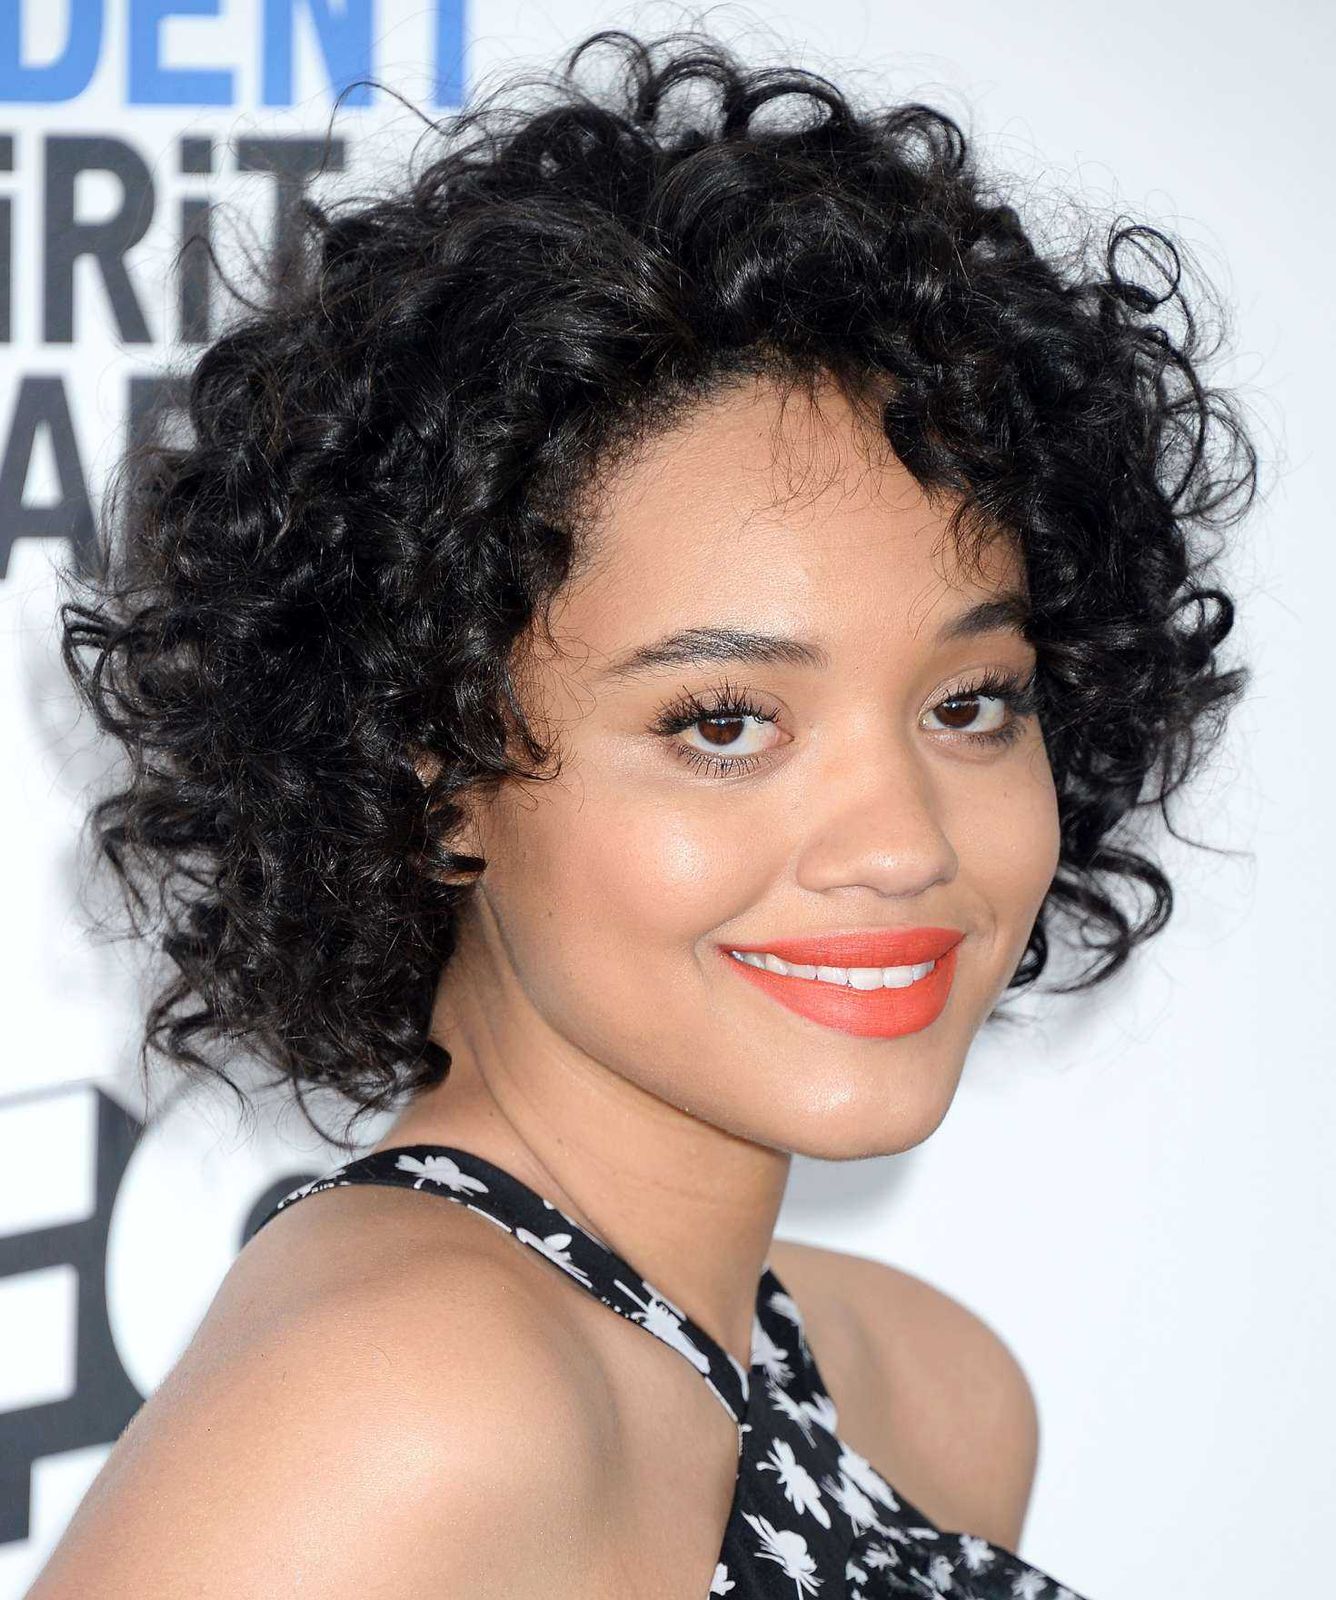 'We work better with discipline': Kiersey Clemons' powerful notes in Rent Live